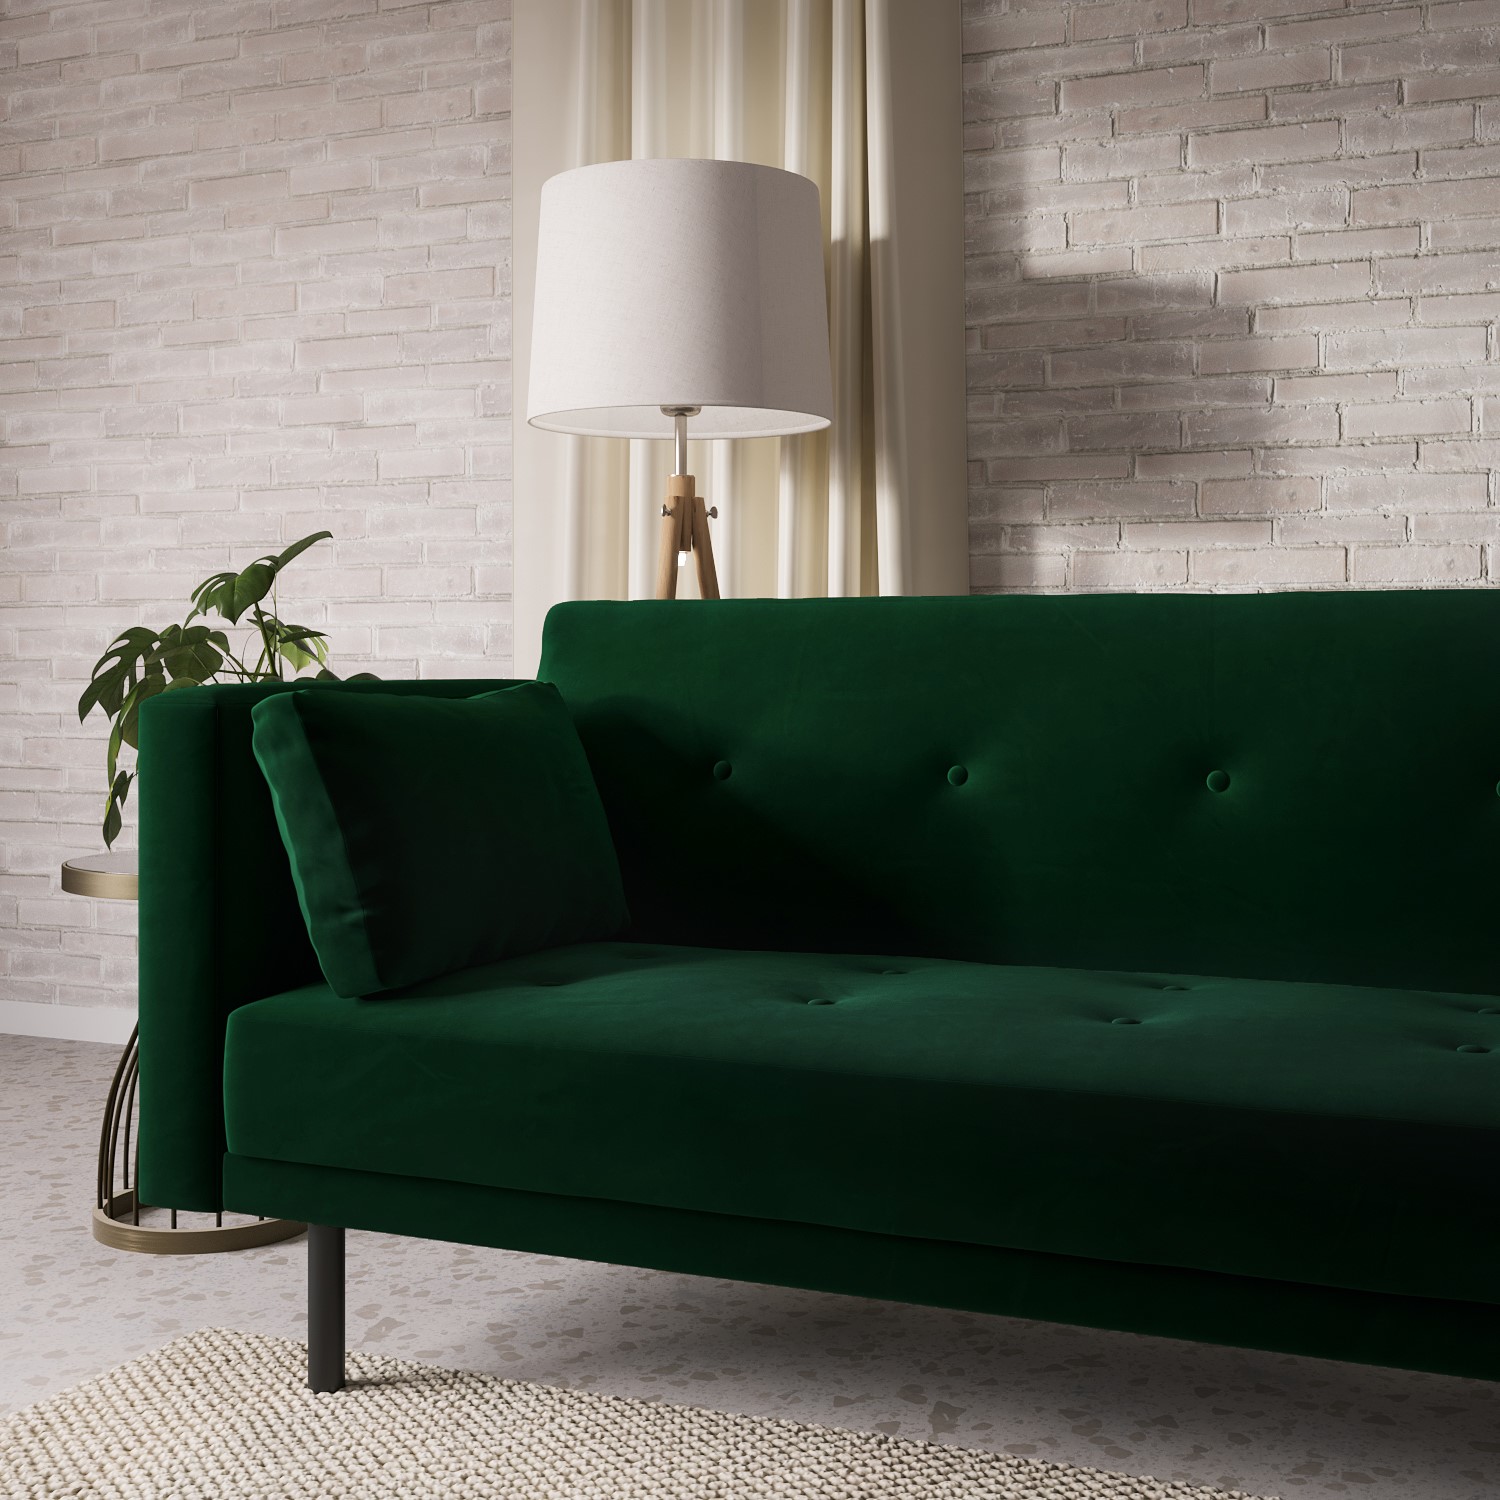 Read more about Green velvet click clack sofa bed seats 3 rory